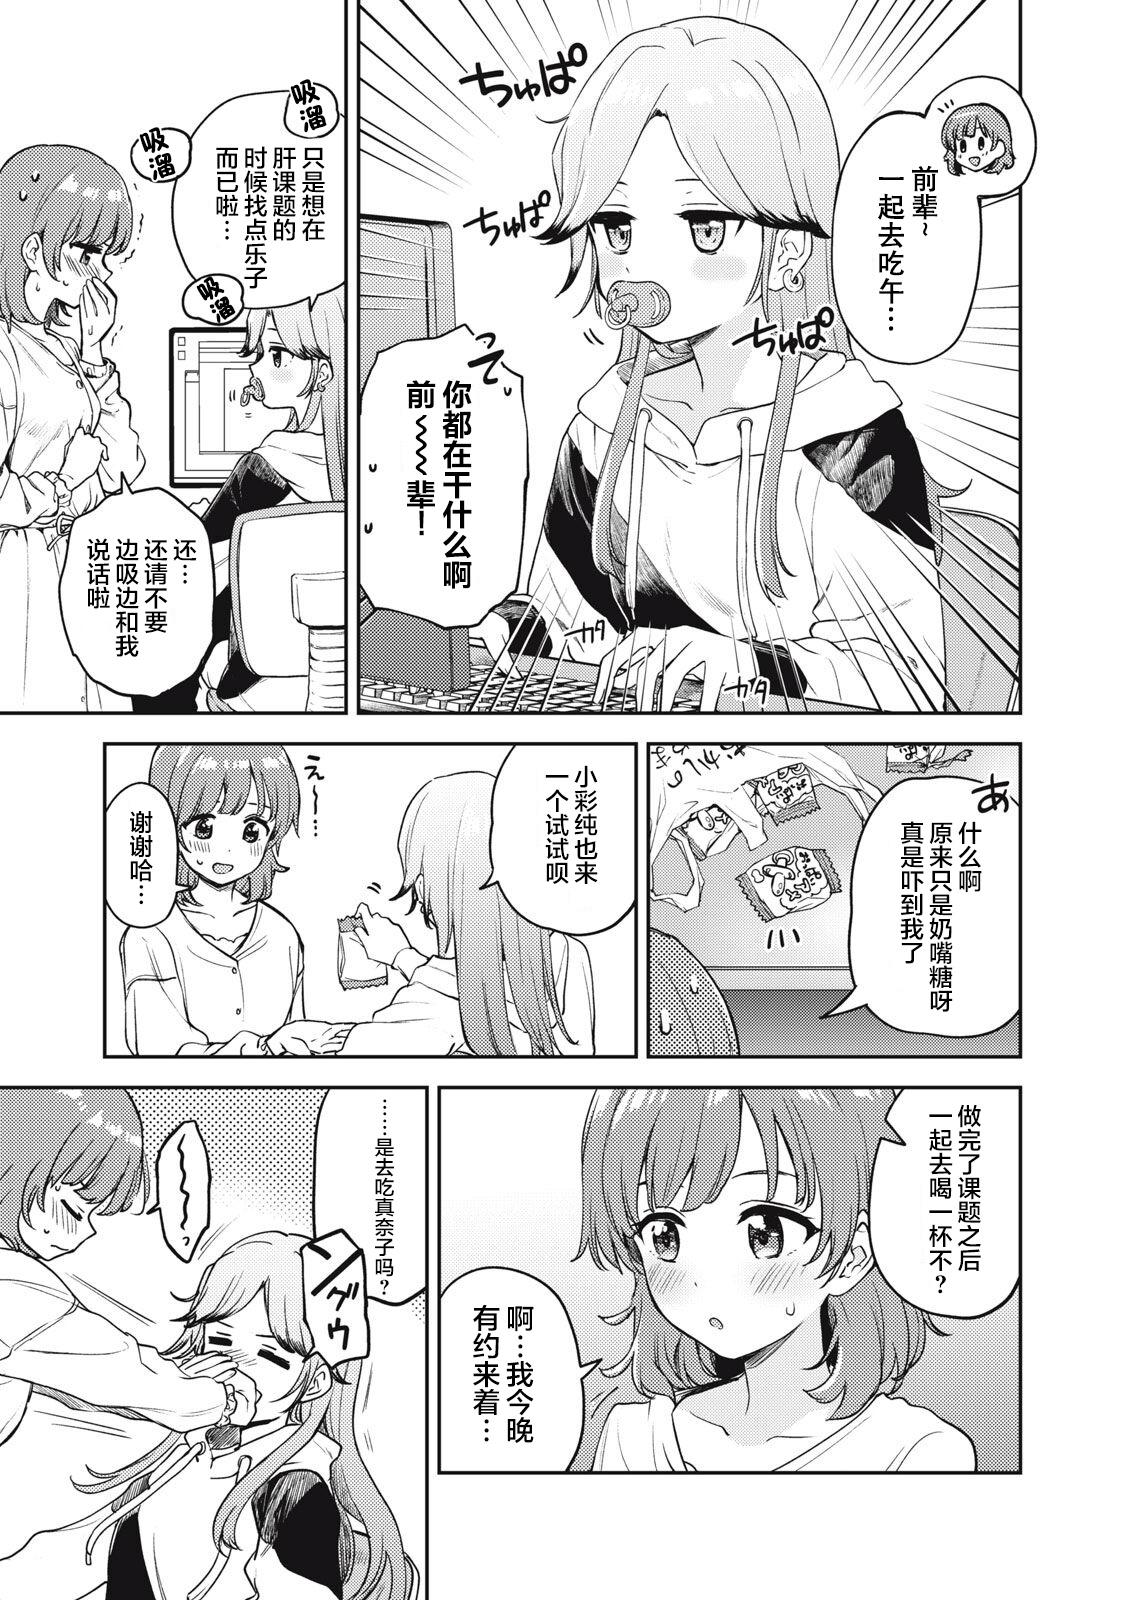 Celebrity Sex Asumi-chan Is Interested In Lesbian Brothels! Extra Episode Dicksucking - Page 1